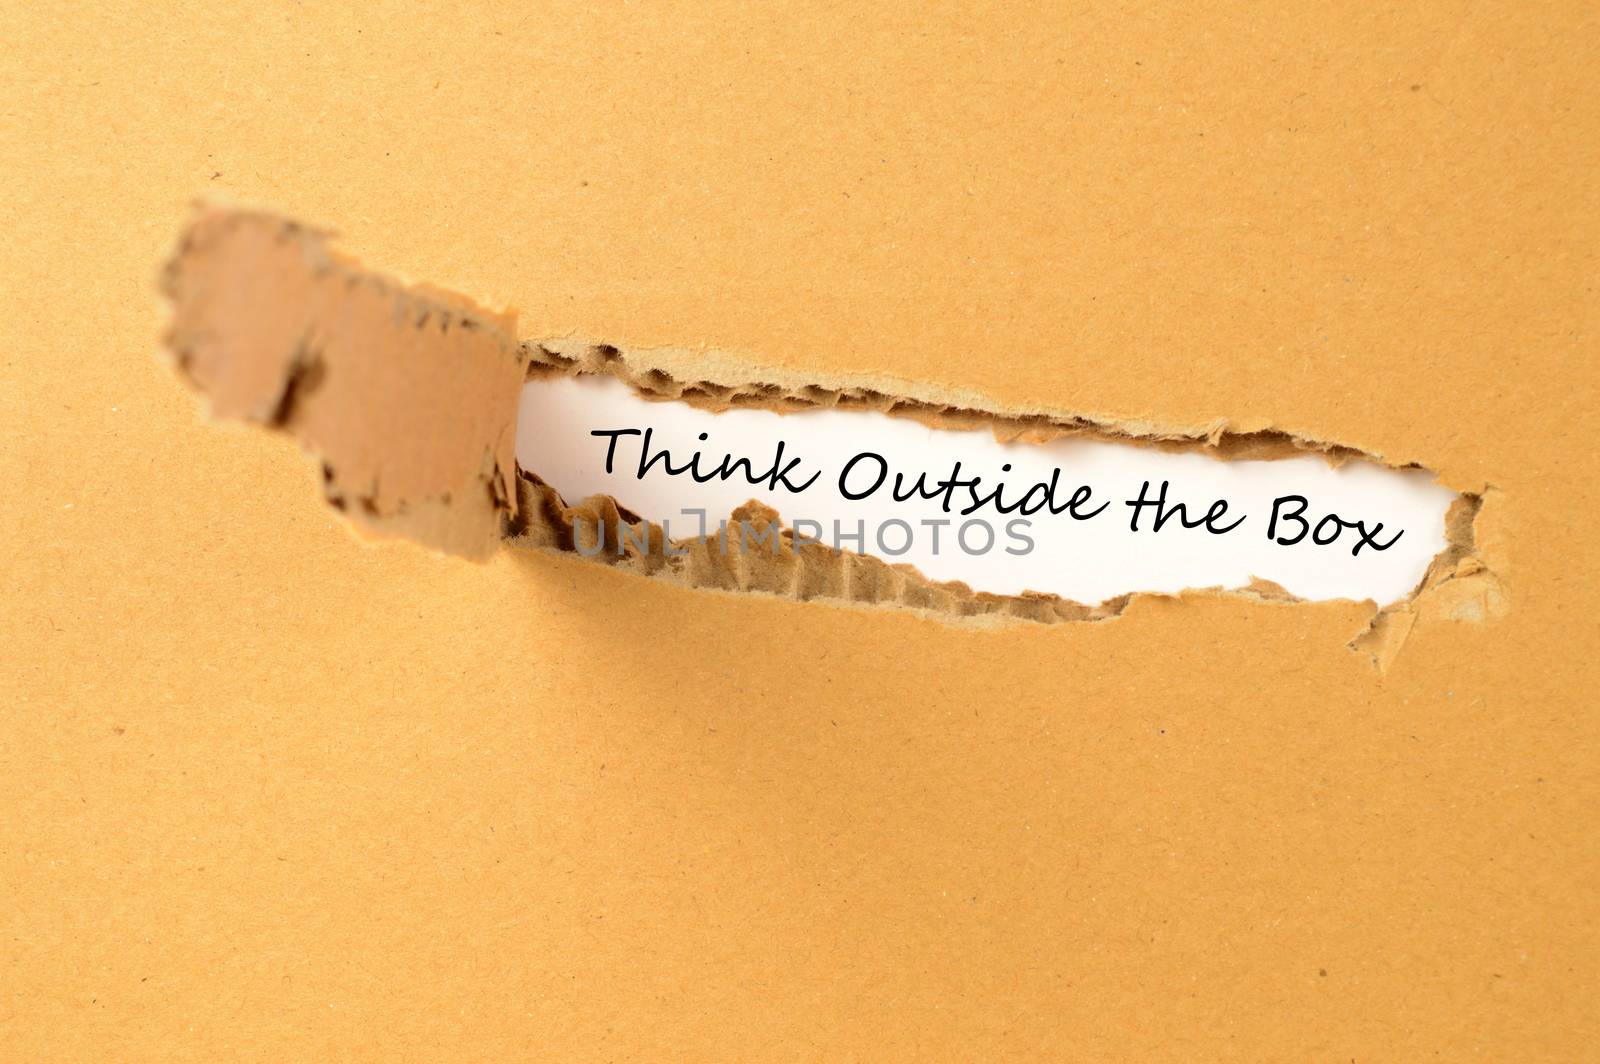 A conceptual image with text revealed from a tear in cardboard saying to think outside the box.